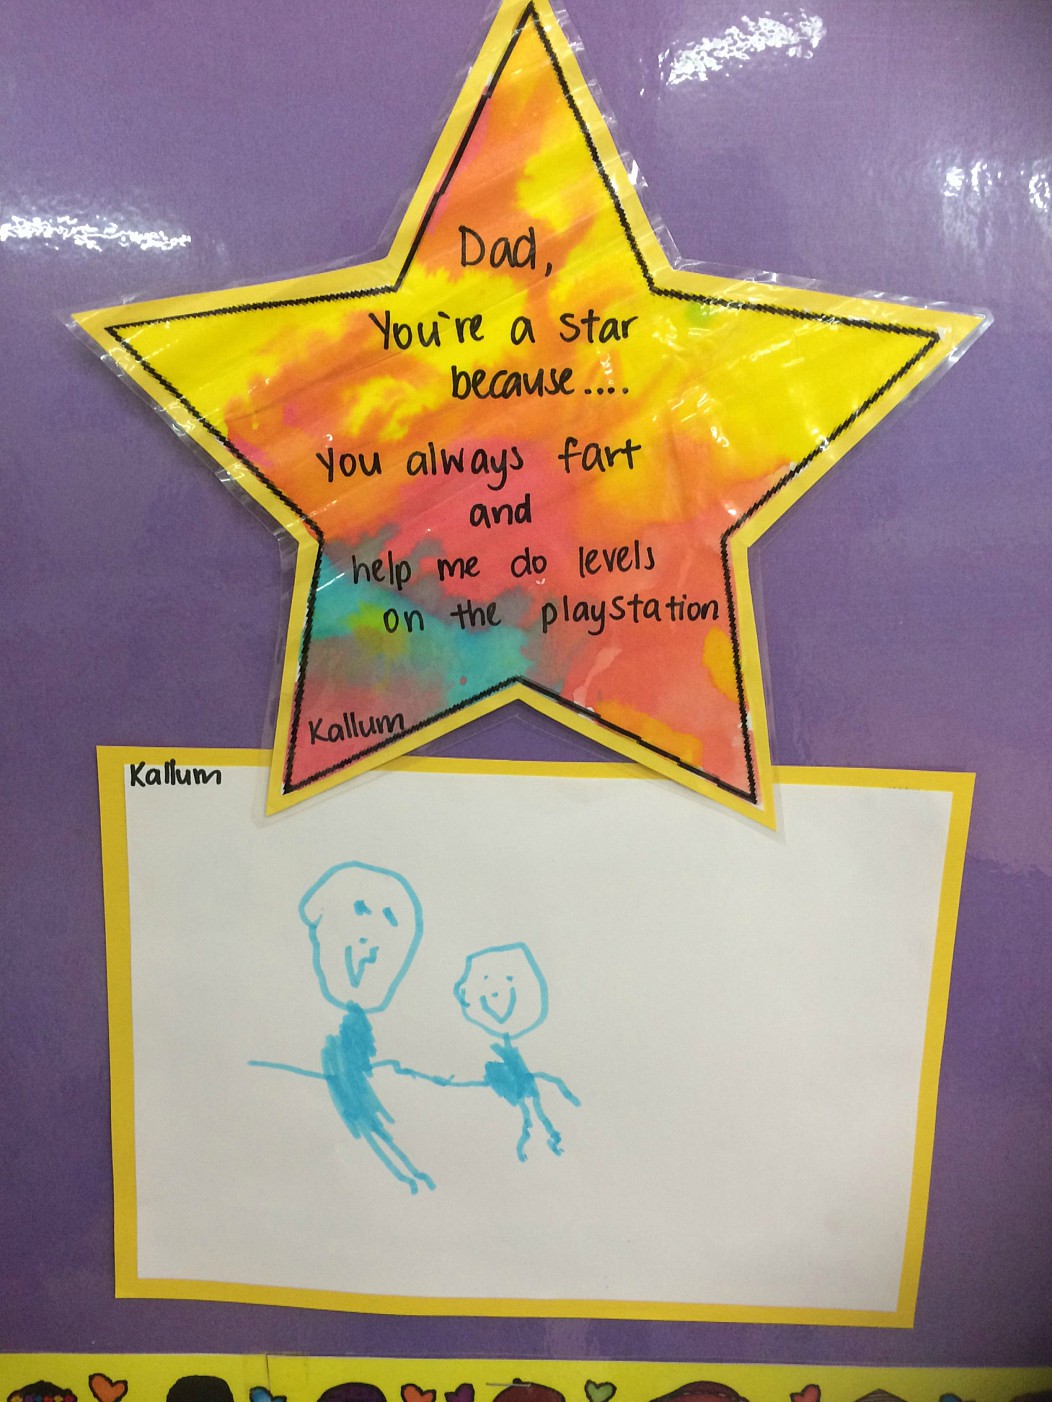 like father like son funny quotes - Dad, You're a star because.... You always fart and help me do levels on the playstation! Kallum Kallum